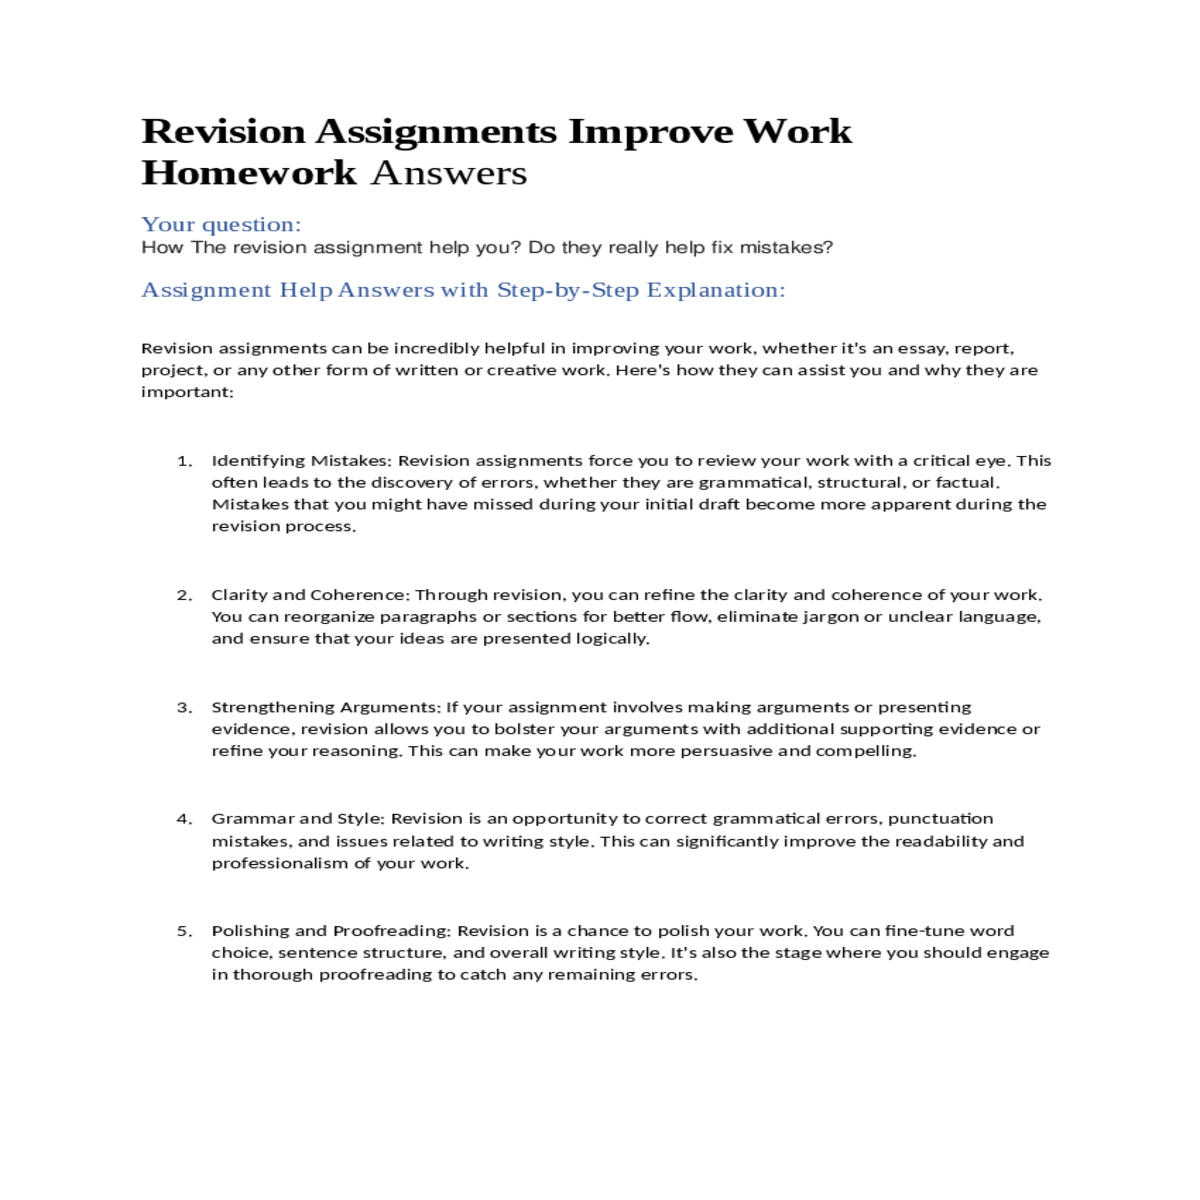 assignment help answers with stepbystep explanatio